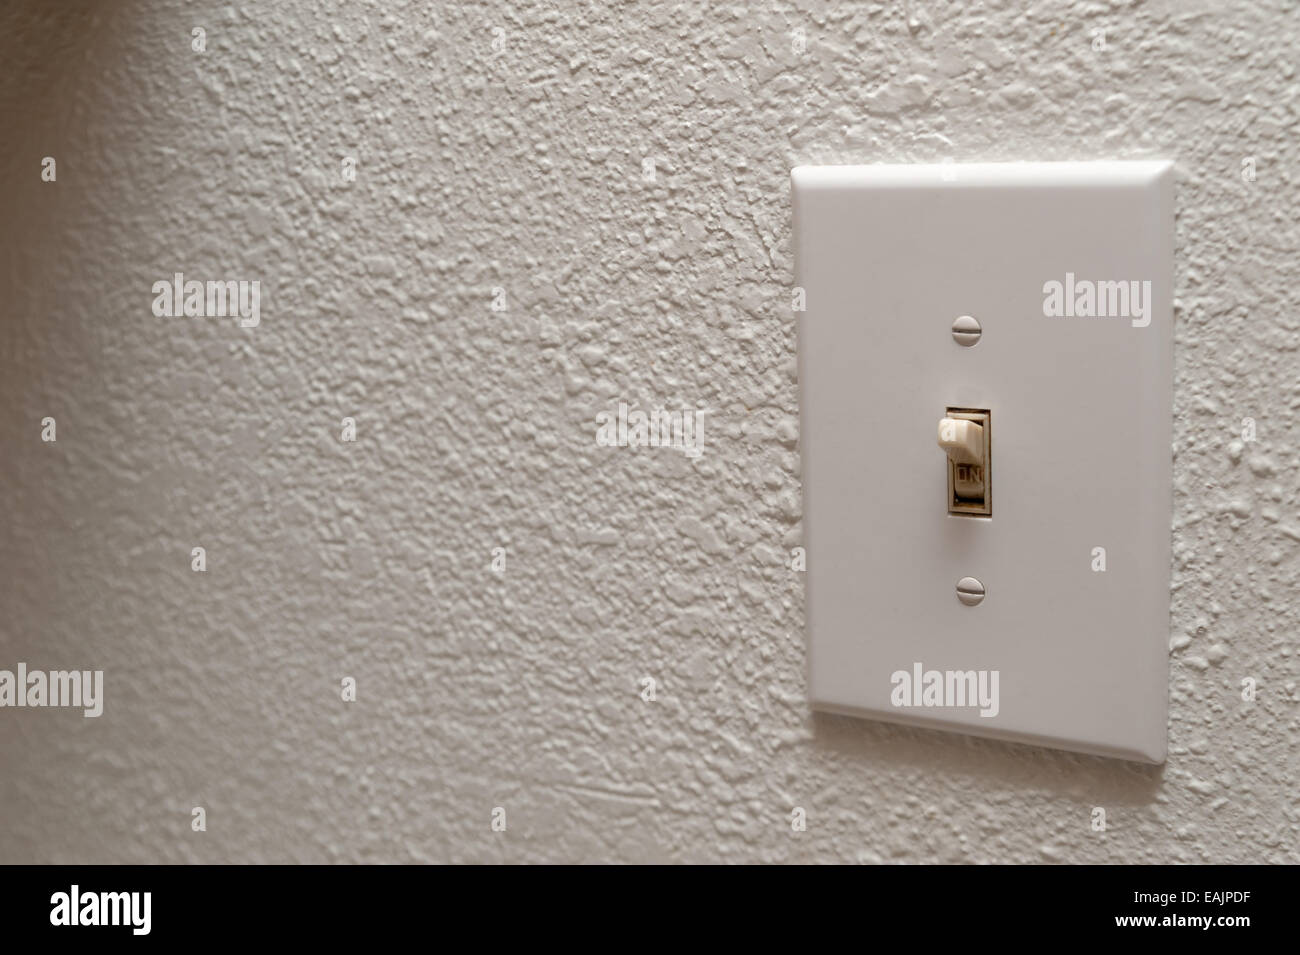 Hand turning wall light switch off Stock Photo